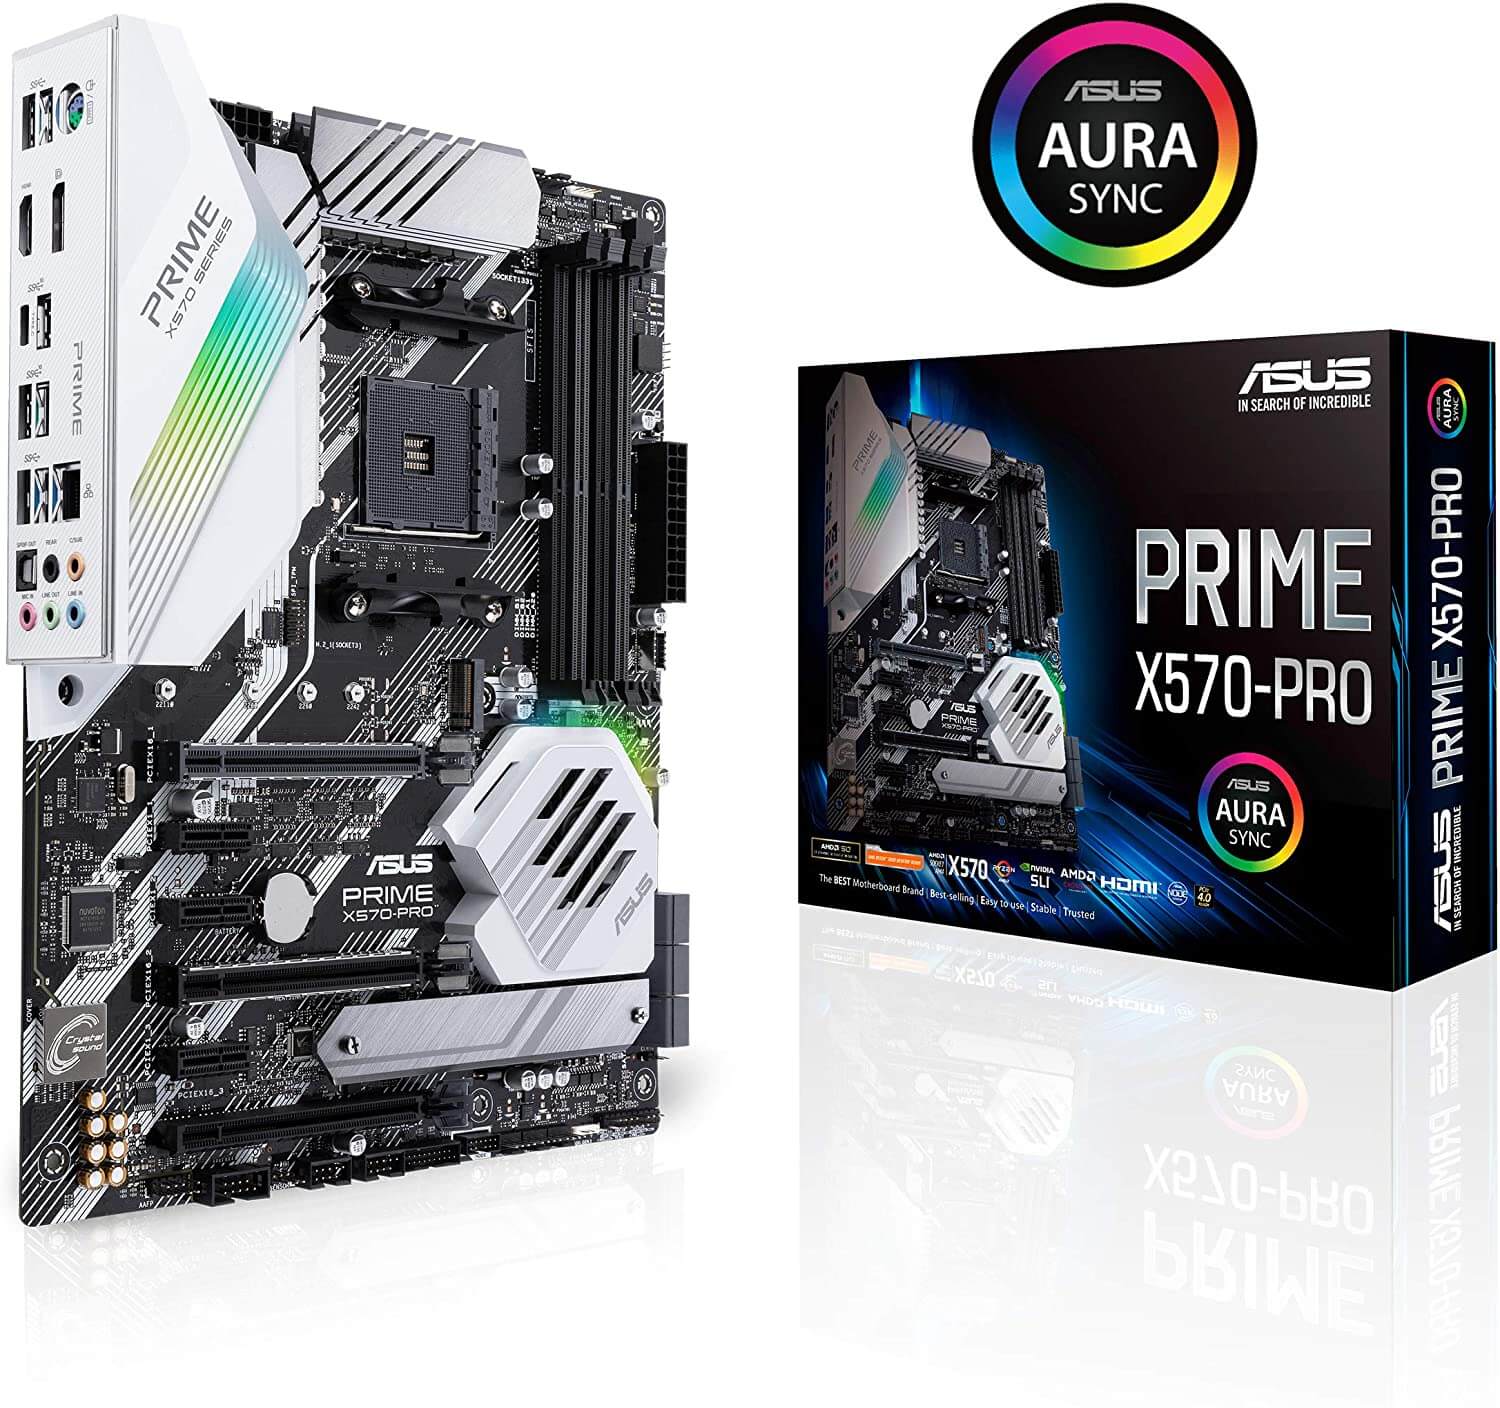 5 Best Motherboards For Ryzen 5 3600: Reviews | ShopForDevice